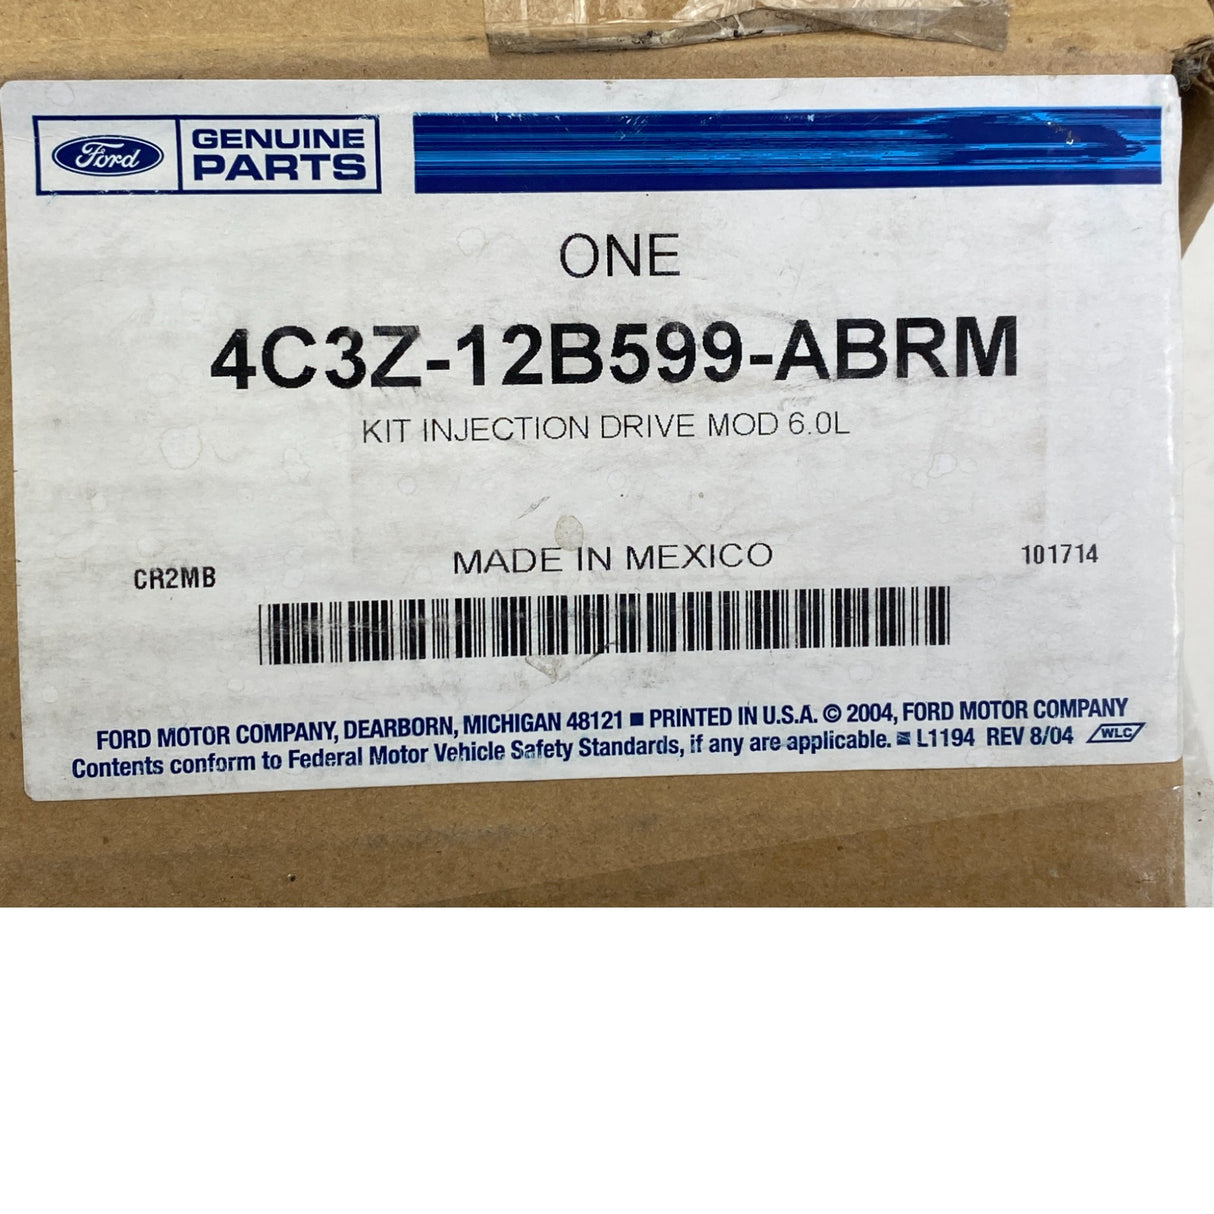 4C3Z-12B599-ABRM Genuine Ford Fuel Injection Control Module